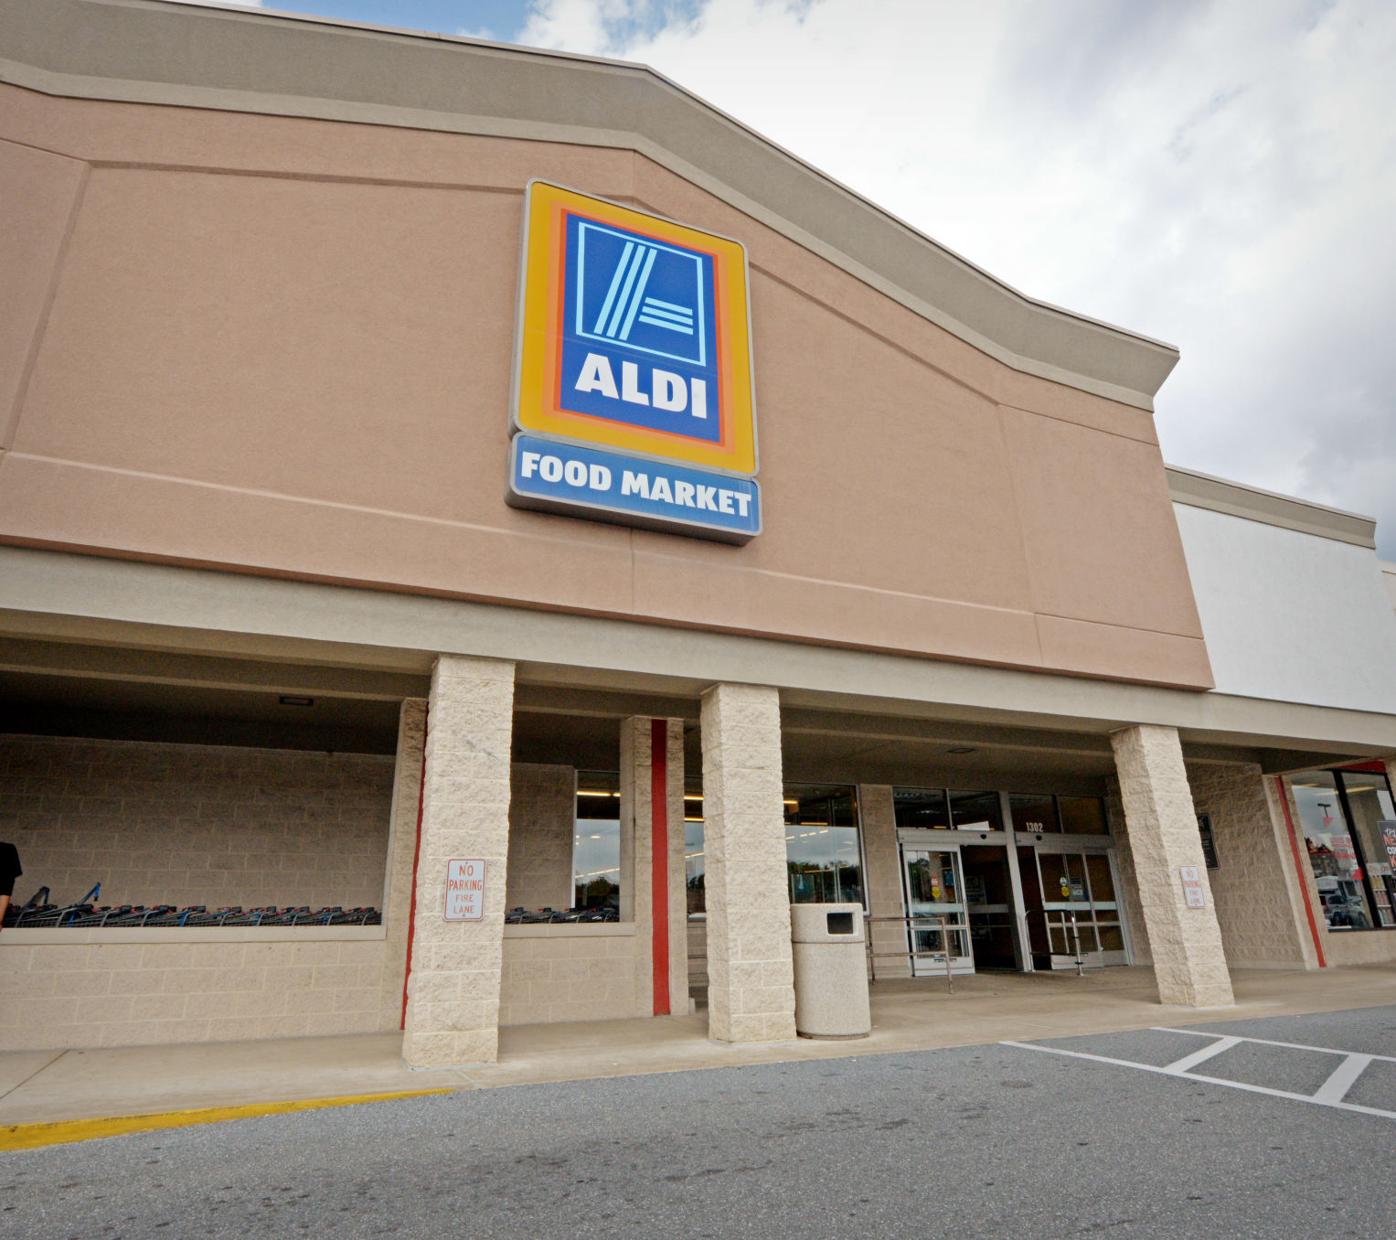 Aldi Rival Lidl Is Expanding in US: History, Size, Store Count